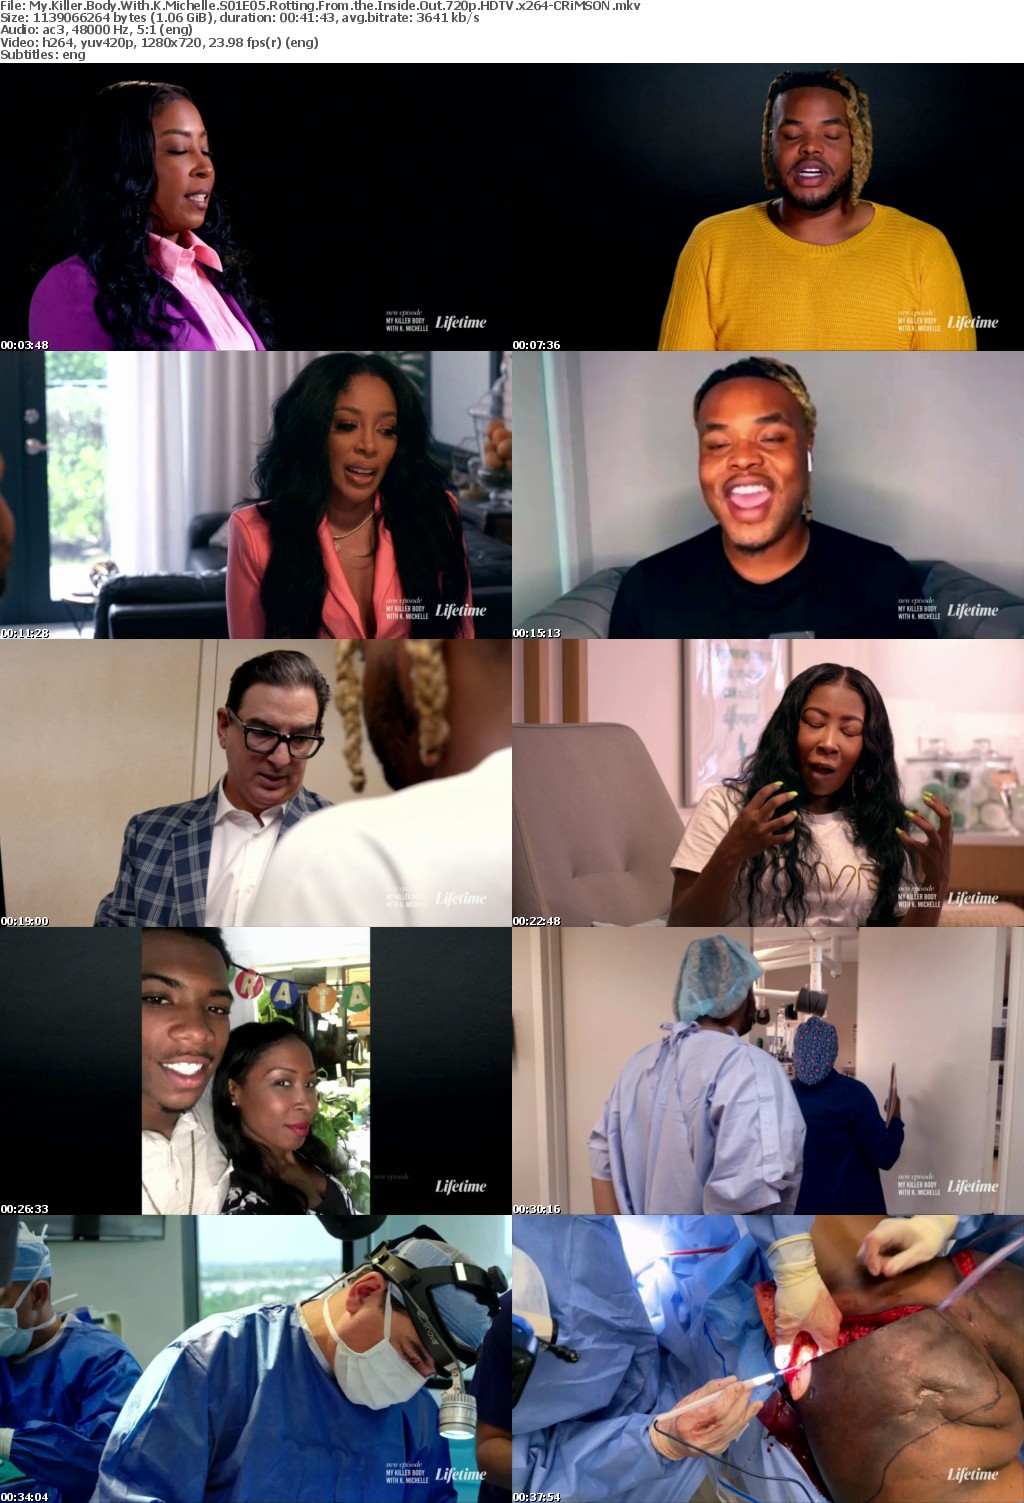 My Killer Body With K Michelle S01E05 Rotting From the Inside Out 720p HDTV x264-CRiMSON